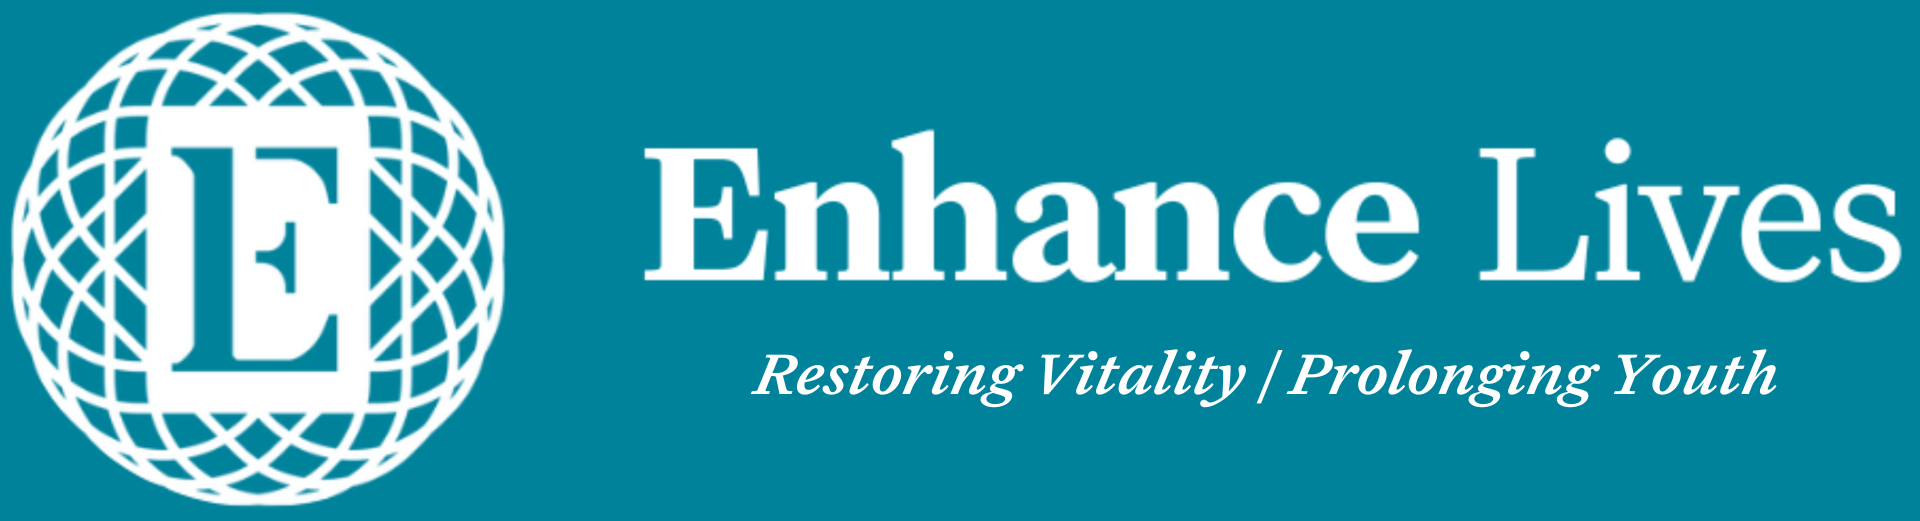 The Enhance Lives company logo on a blue background. The icon to the left is white with the text "Enhance Lives. Restoring Vitality / Prolonging Youth" also in white to the right.